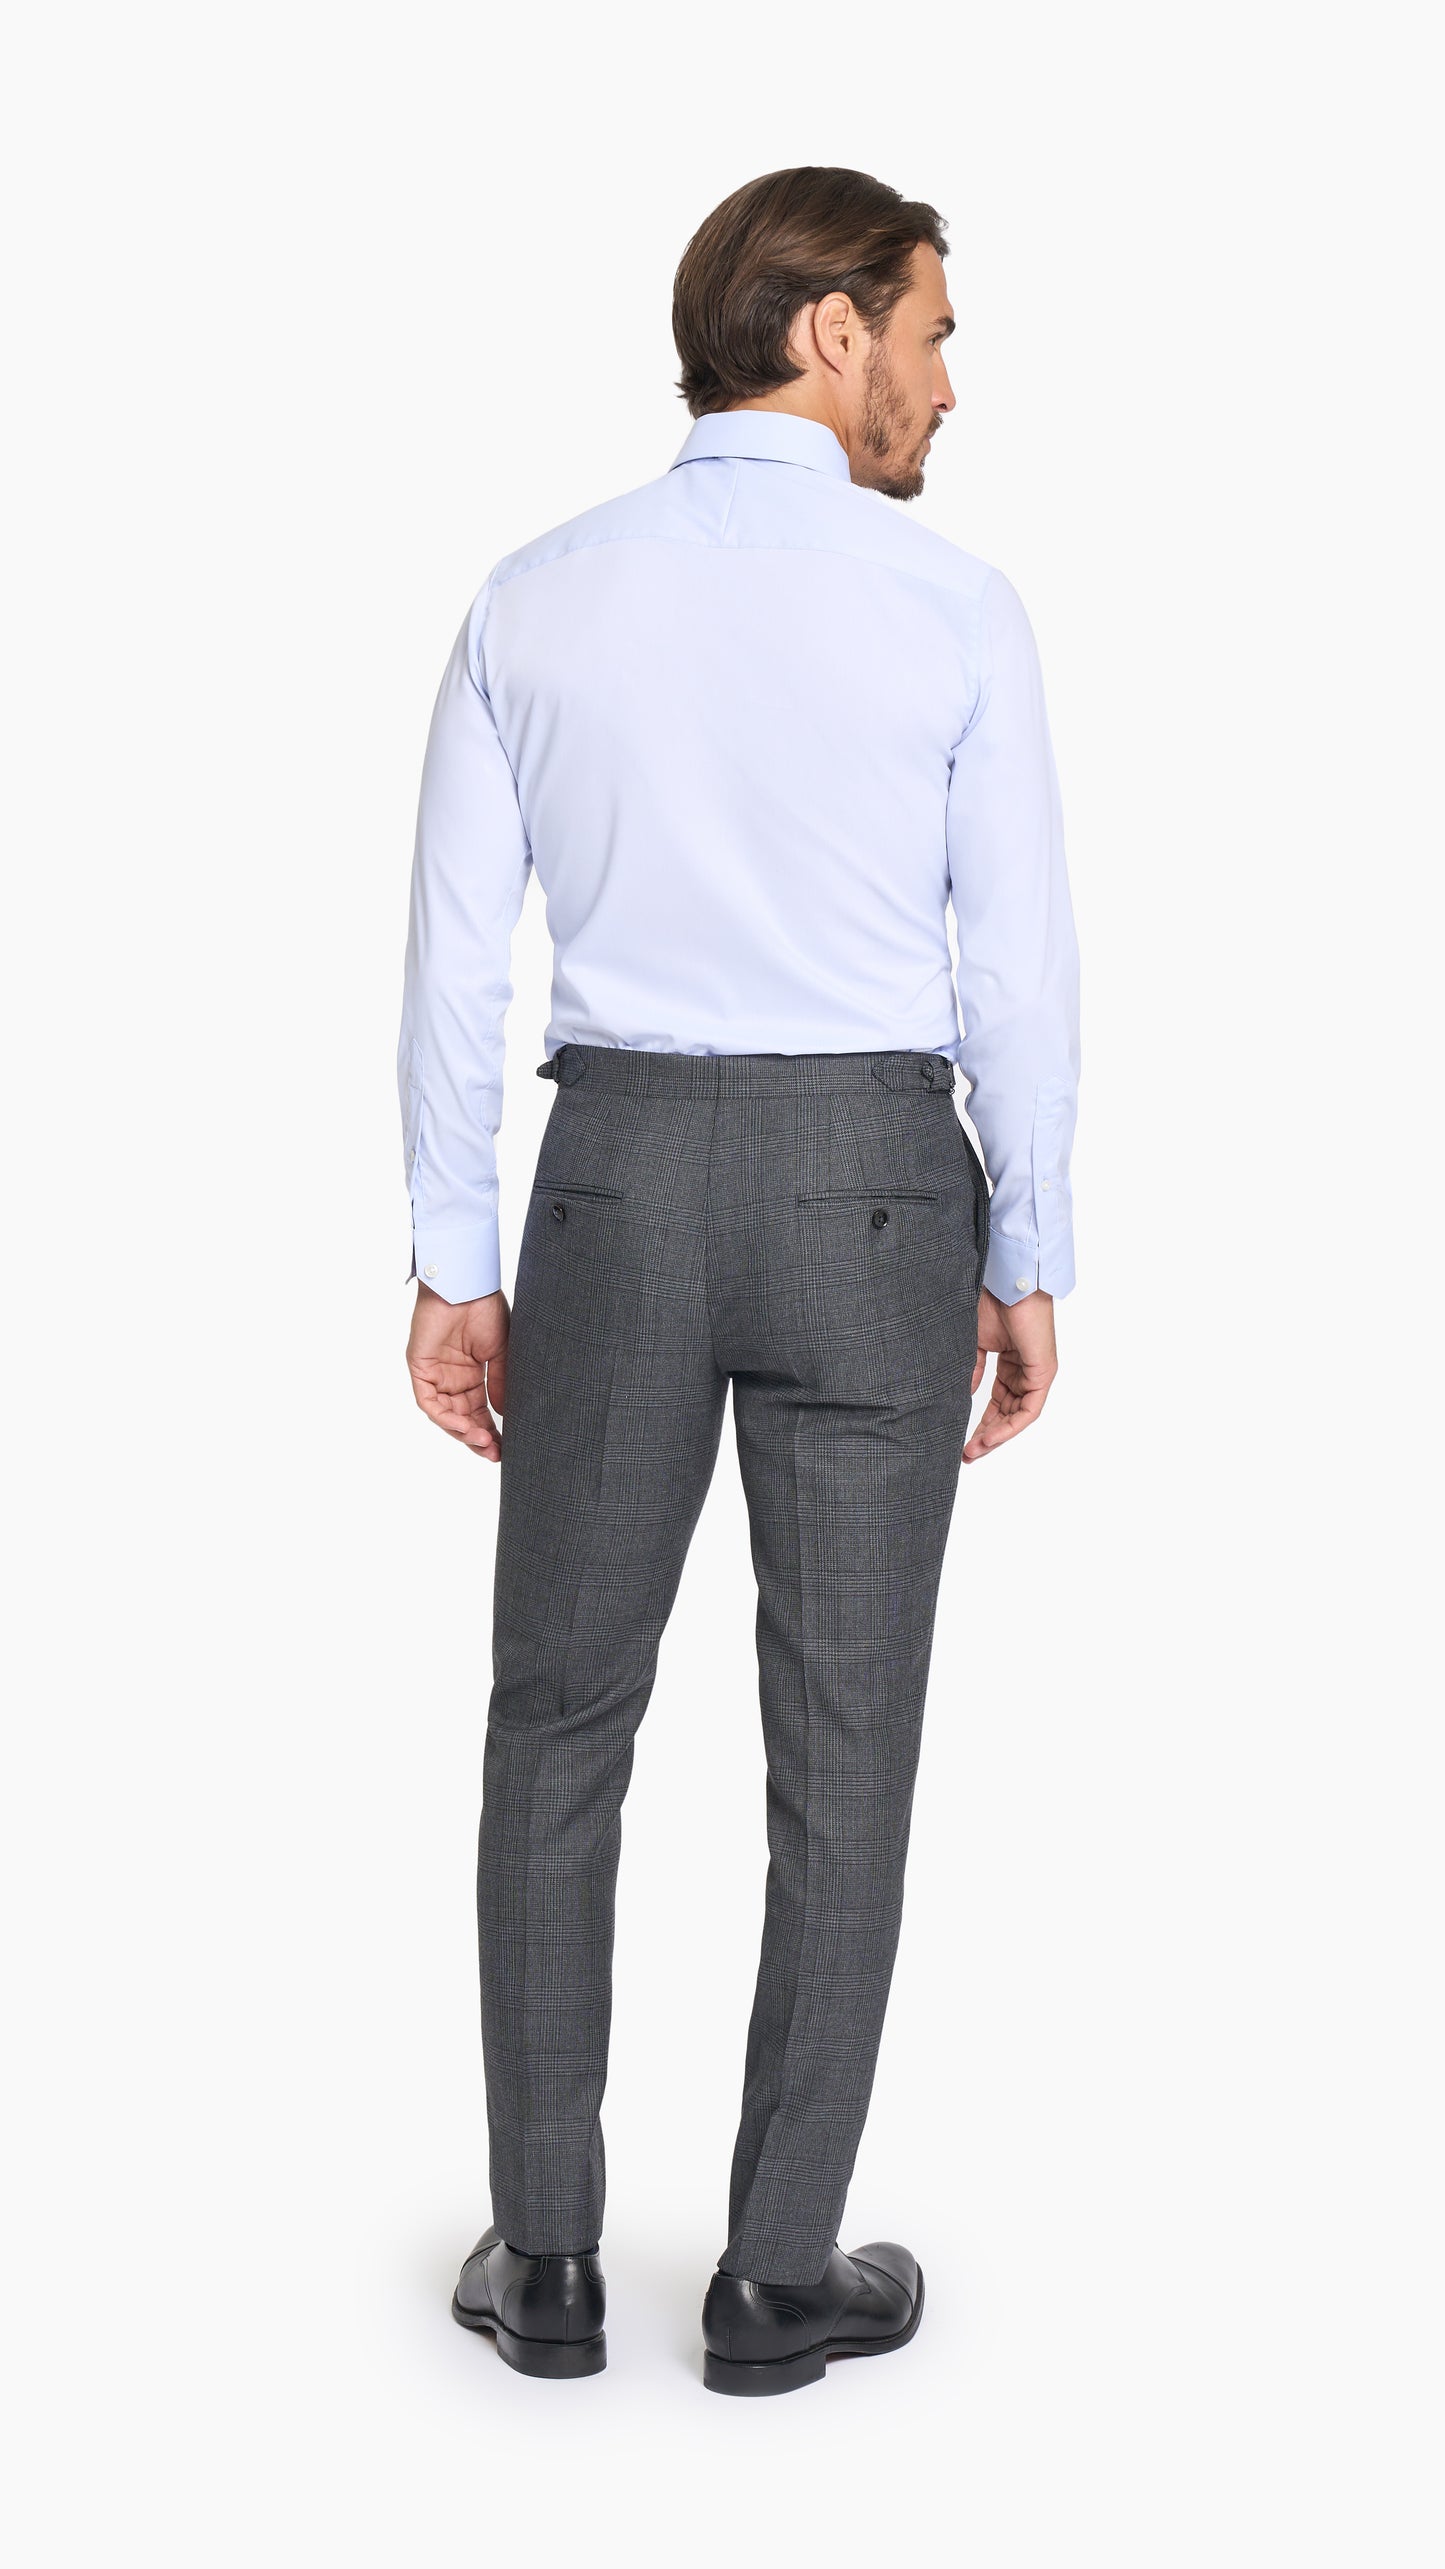 Charcoal Grey Prince of Wales Trouser